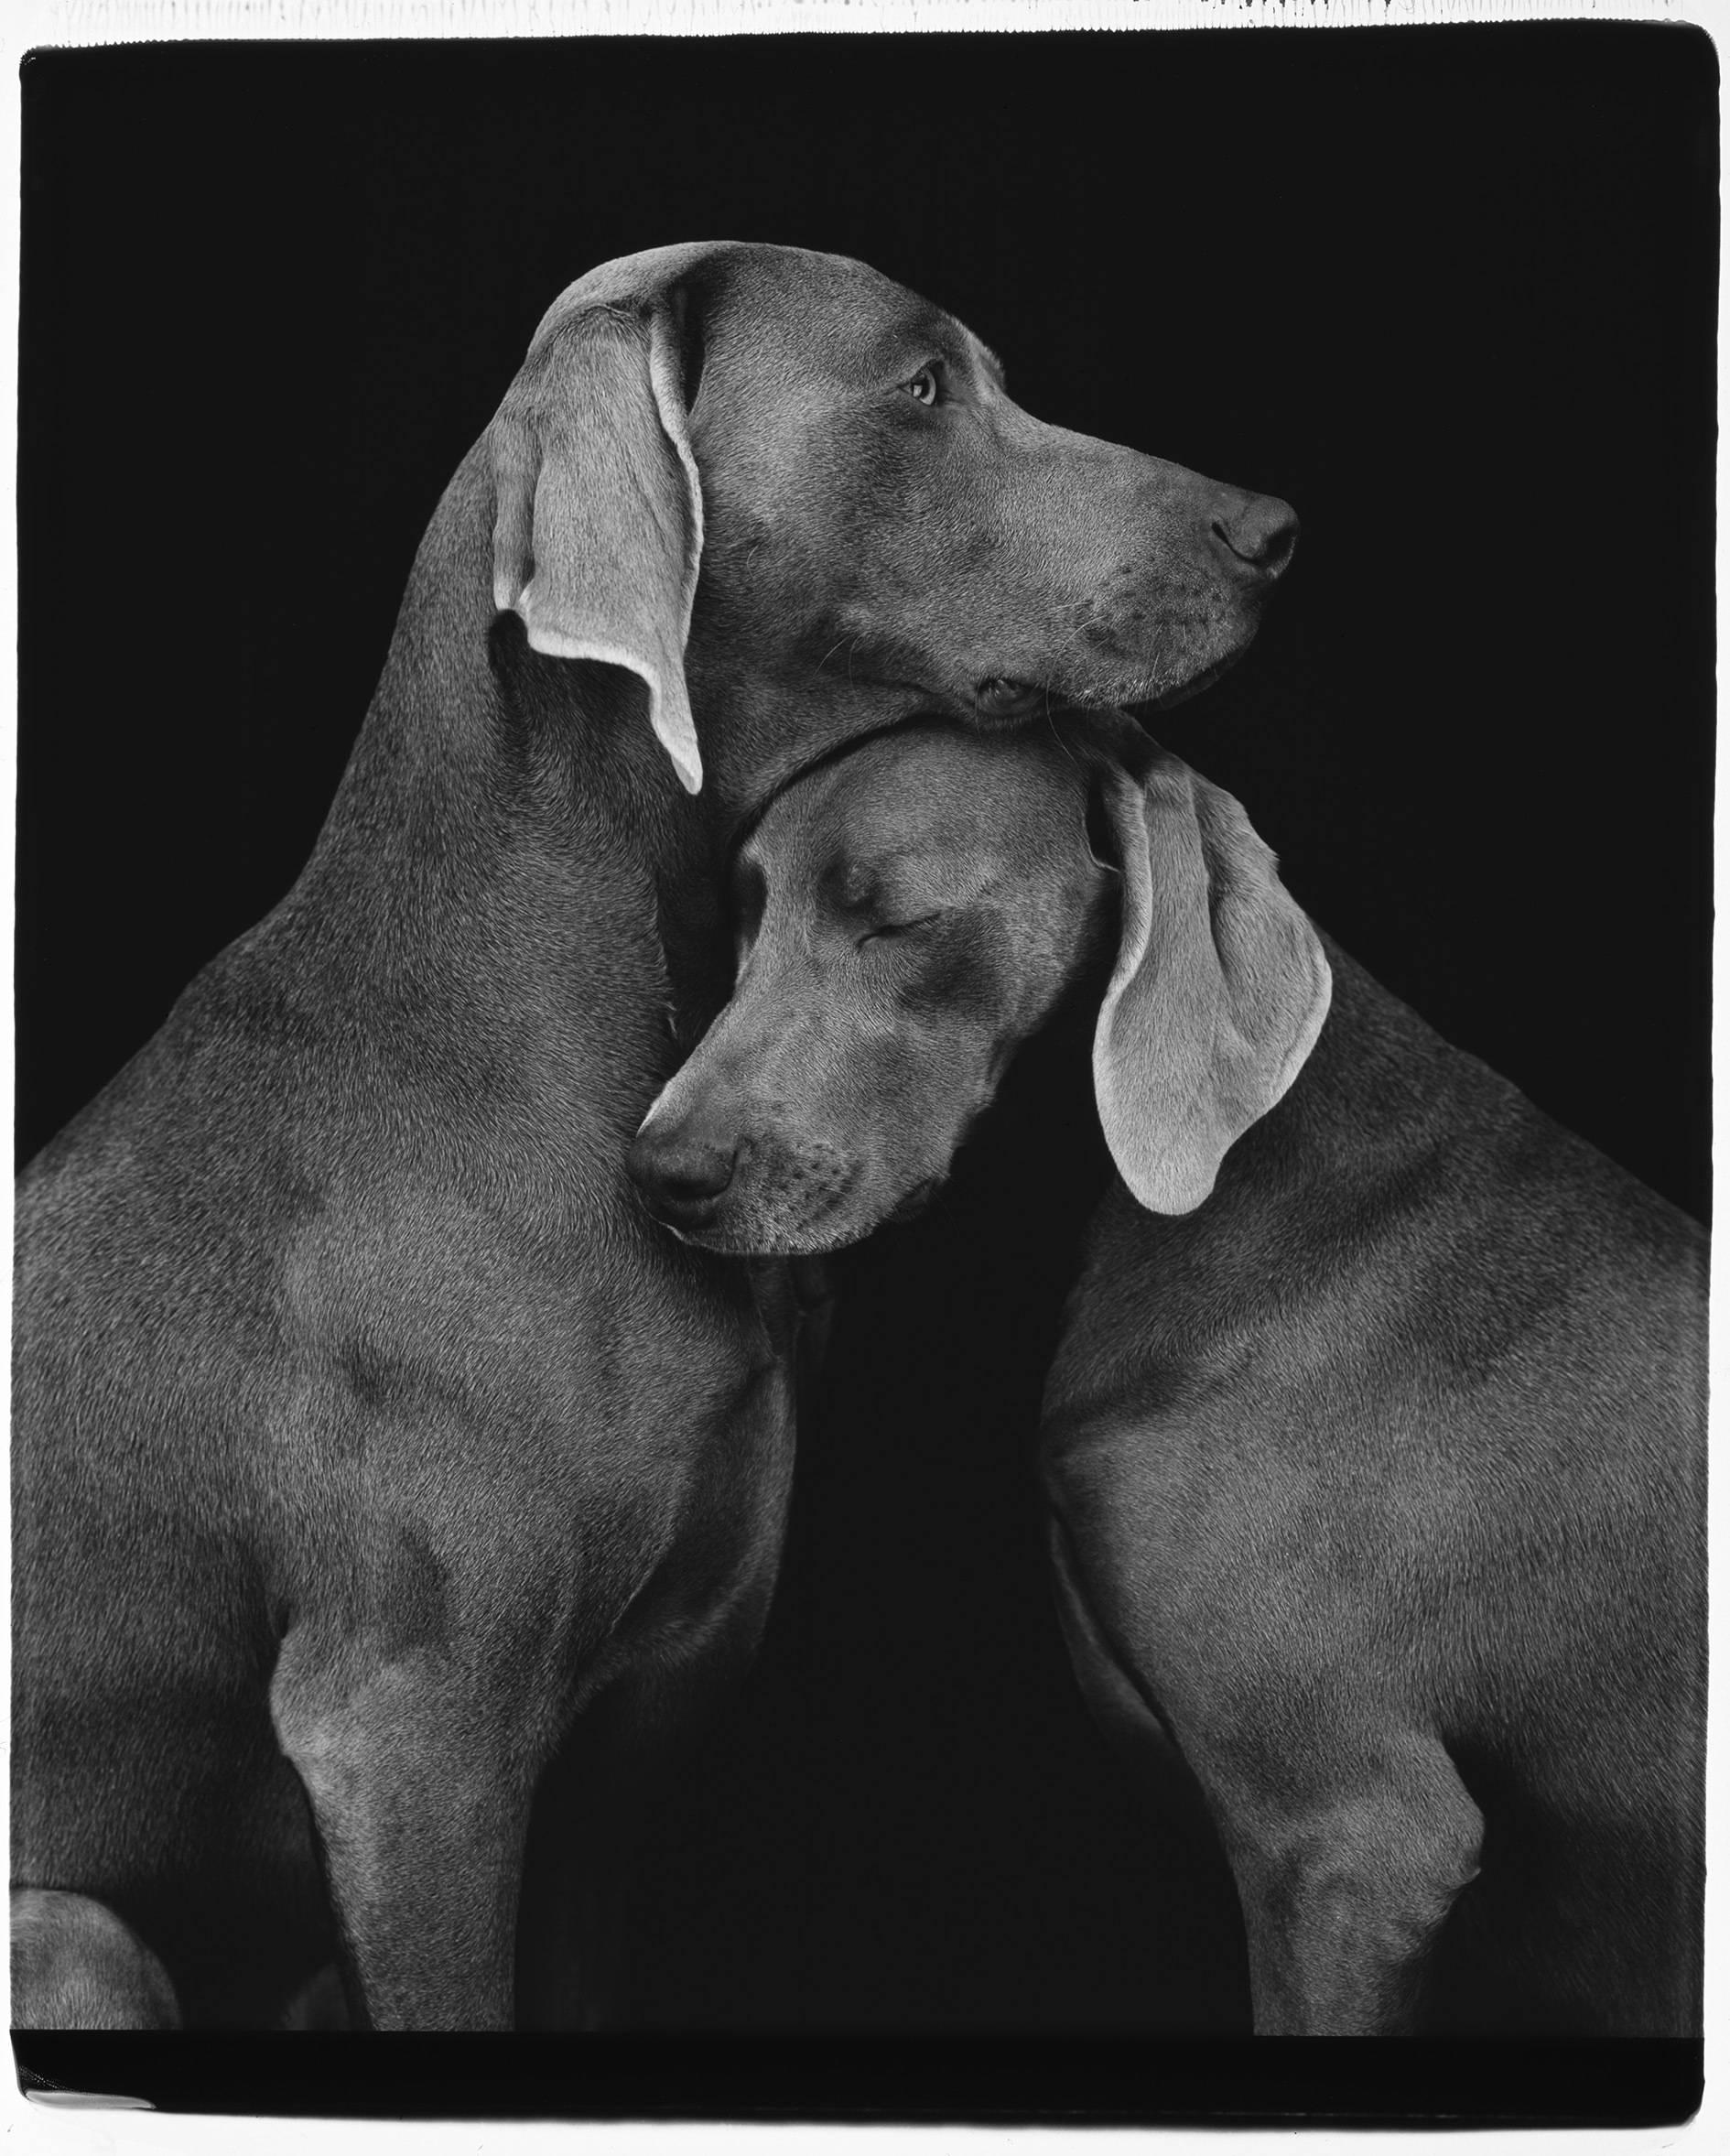 William Wegman
Friends, 2010
Archival pigment printed on Museo Silver Rag
33 1/2 x 24 inches
Edition of 1500, signed